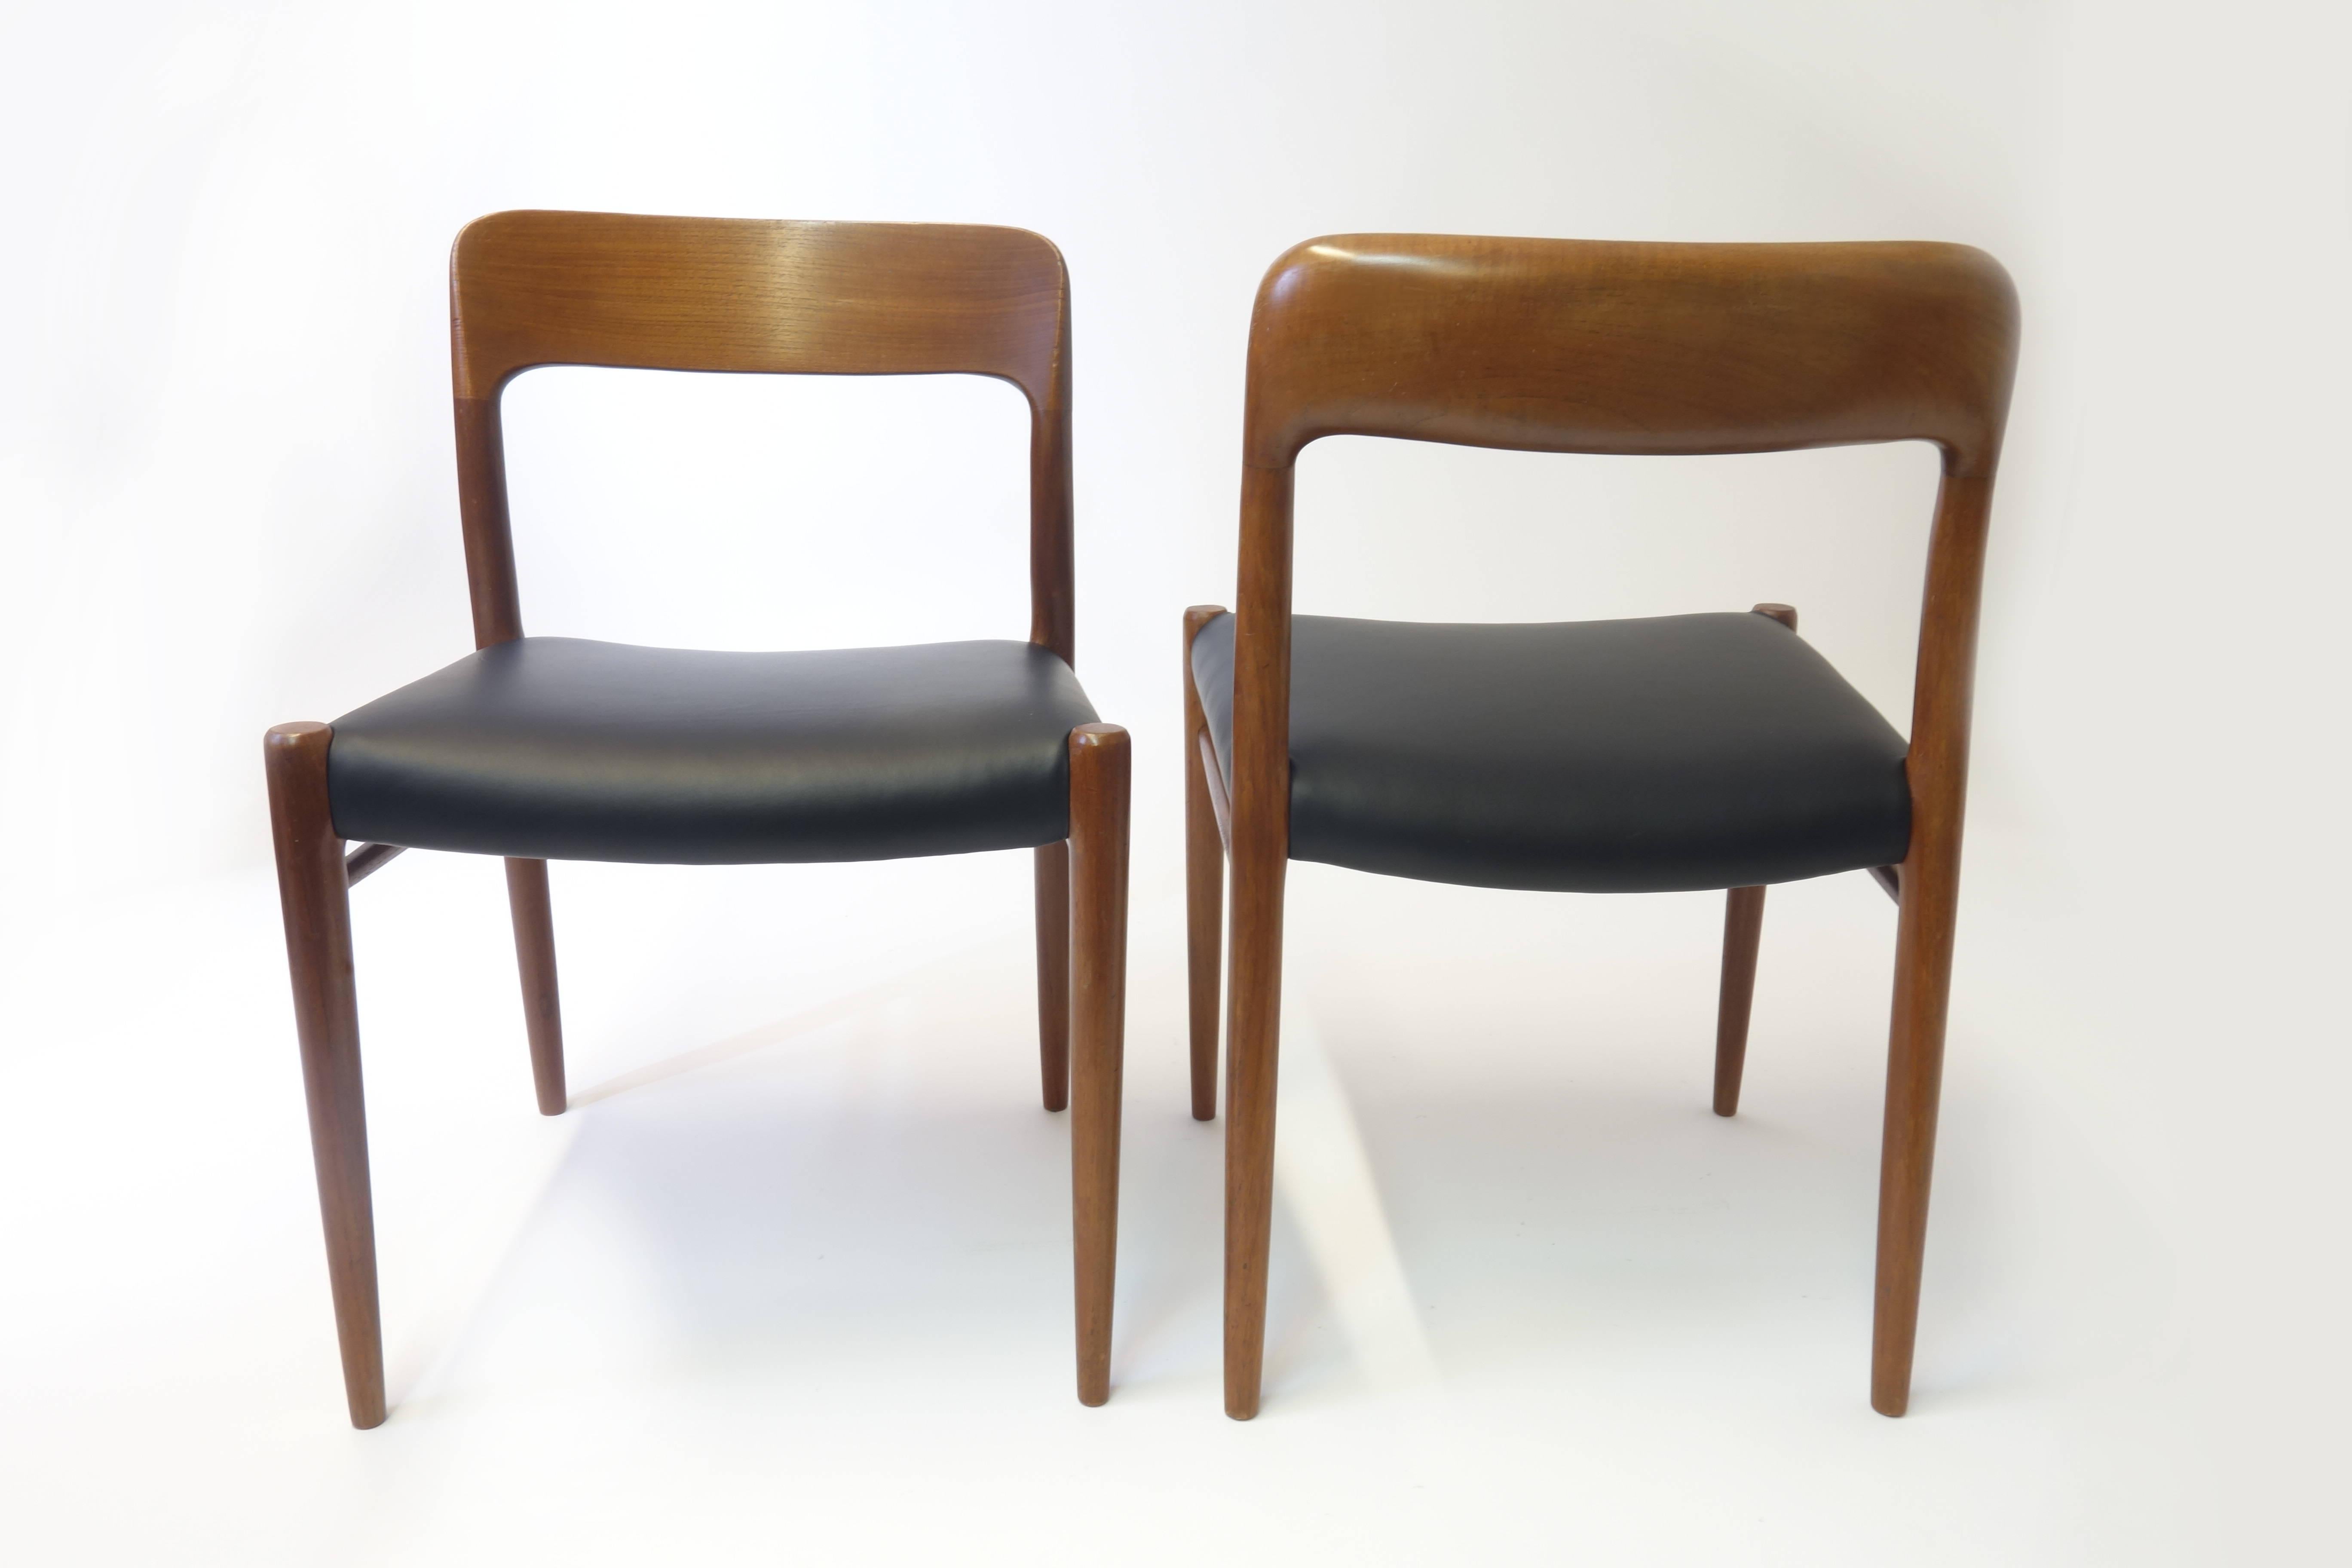 6 exquisite original dining chairs, model number 75 by J. L. Moeller, Denmark, elegantly rounded teakwood frame with organically flowing appearance and marvelous fitting quality. These chairs have been refurbished skilfully and with extreme care.